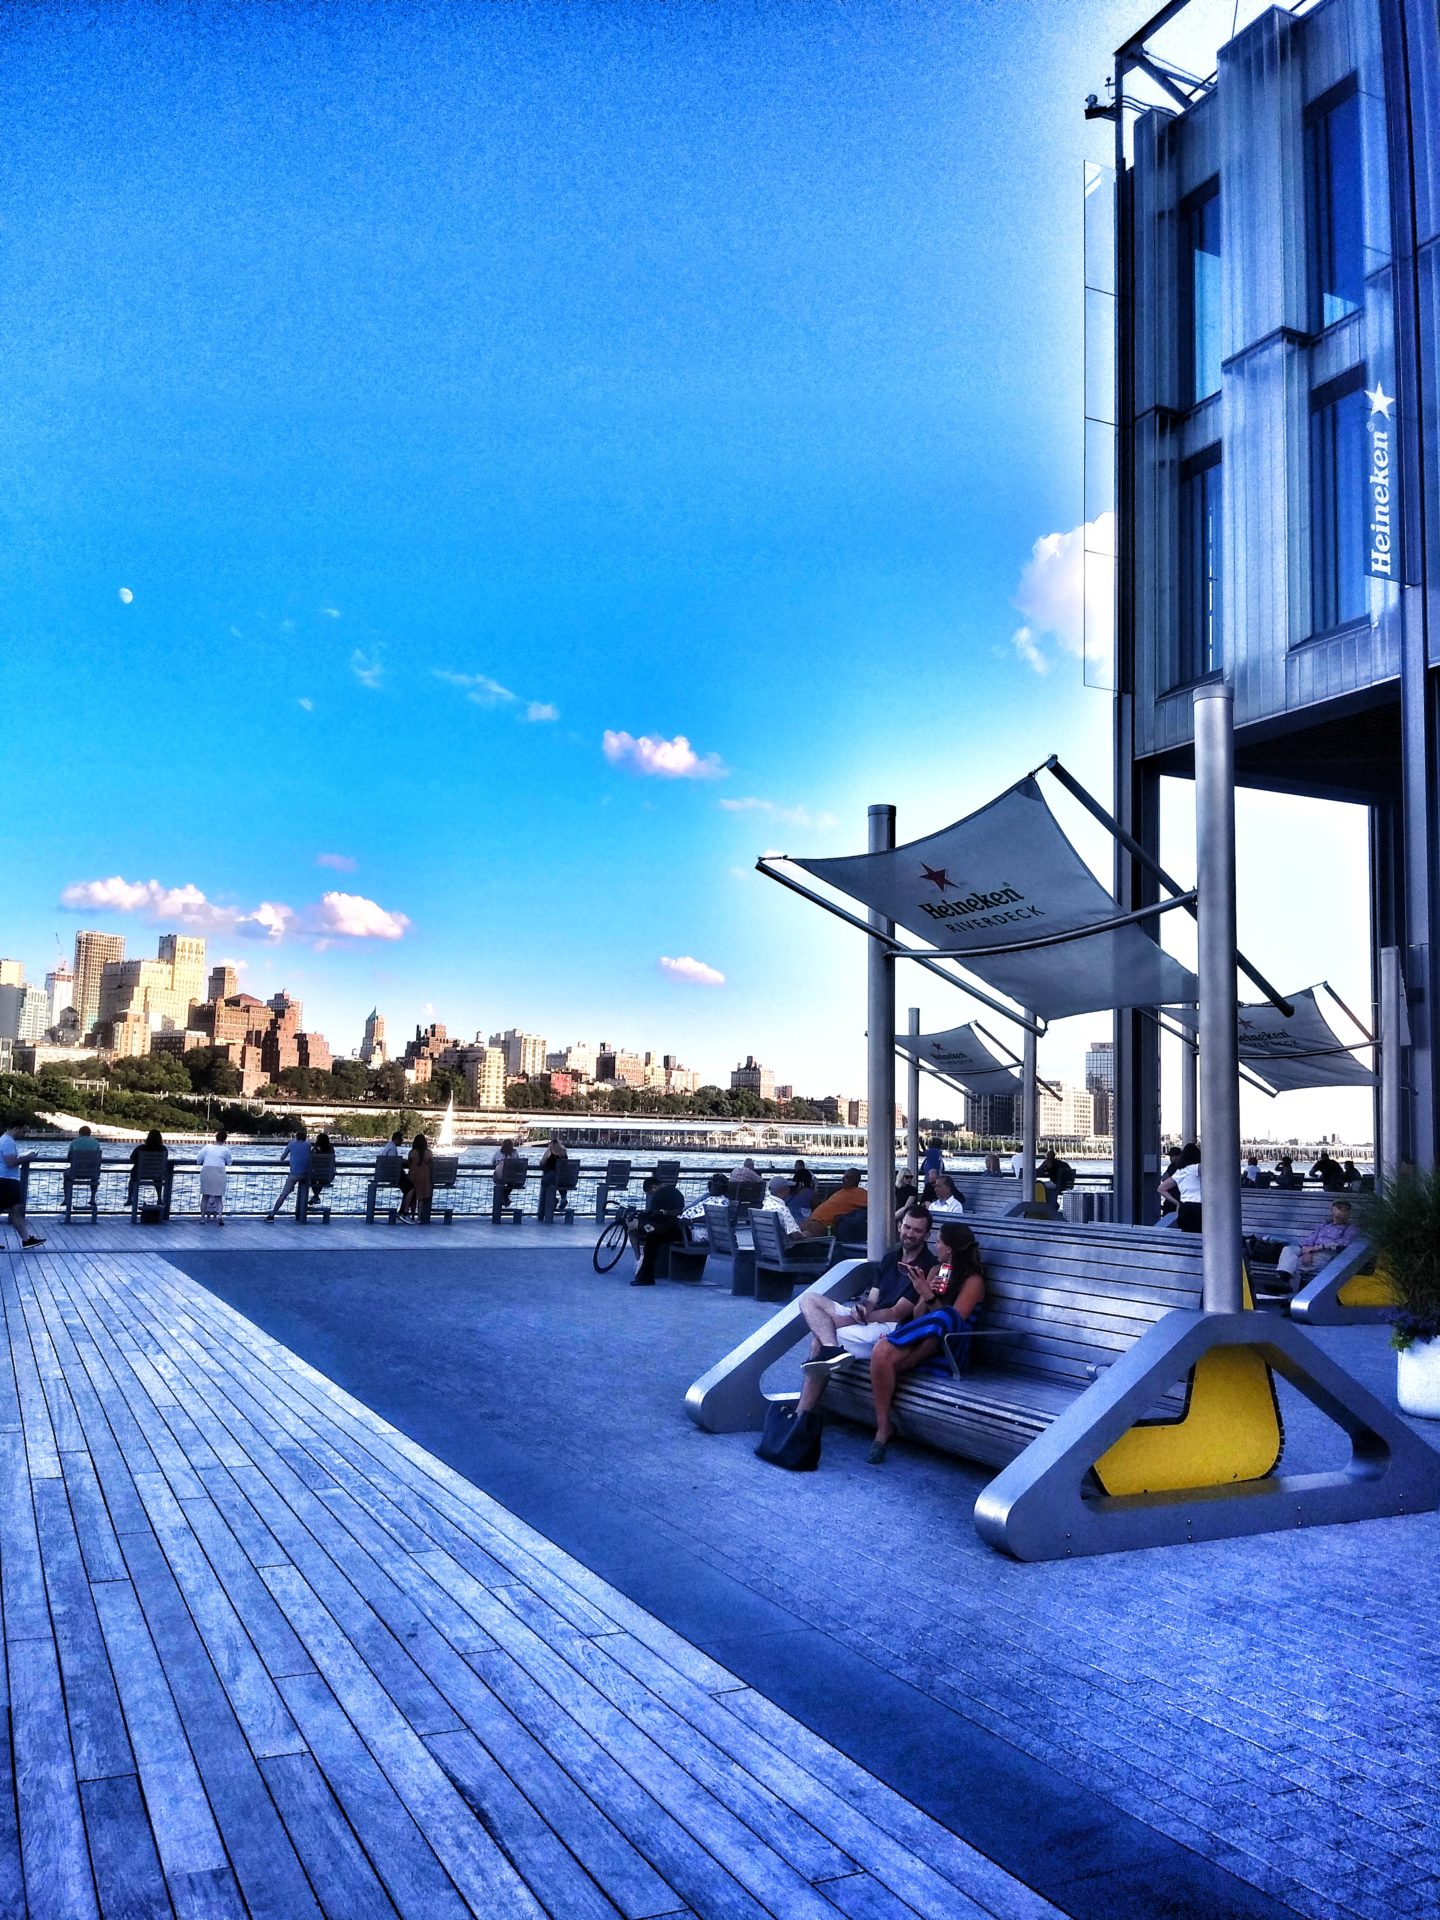 Pier 17 riverdeck and enjoying the Seaport District NYC